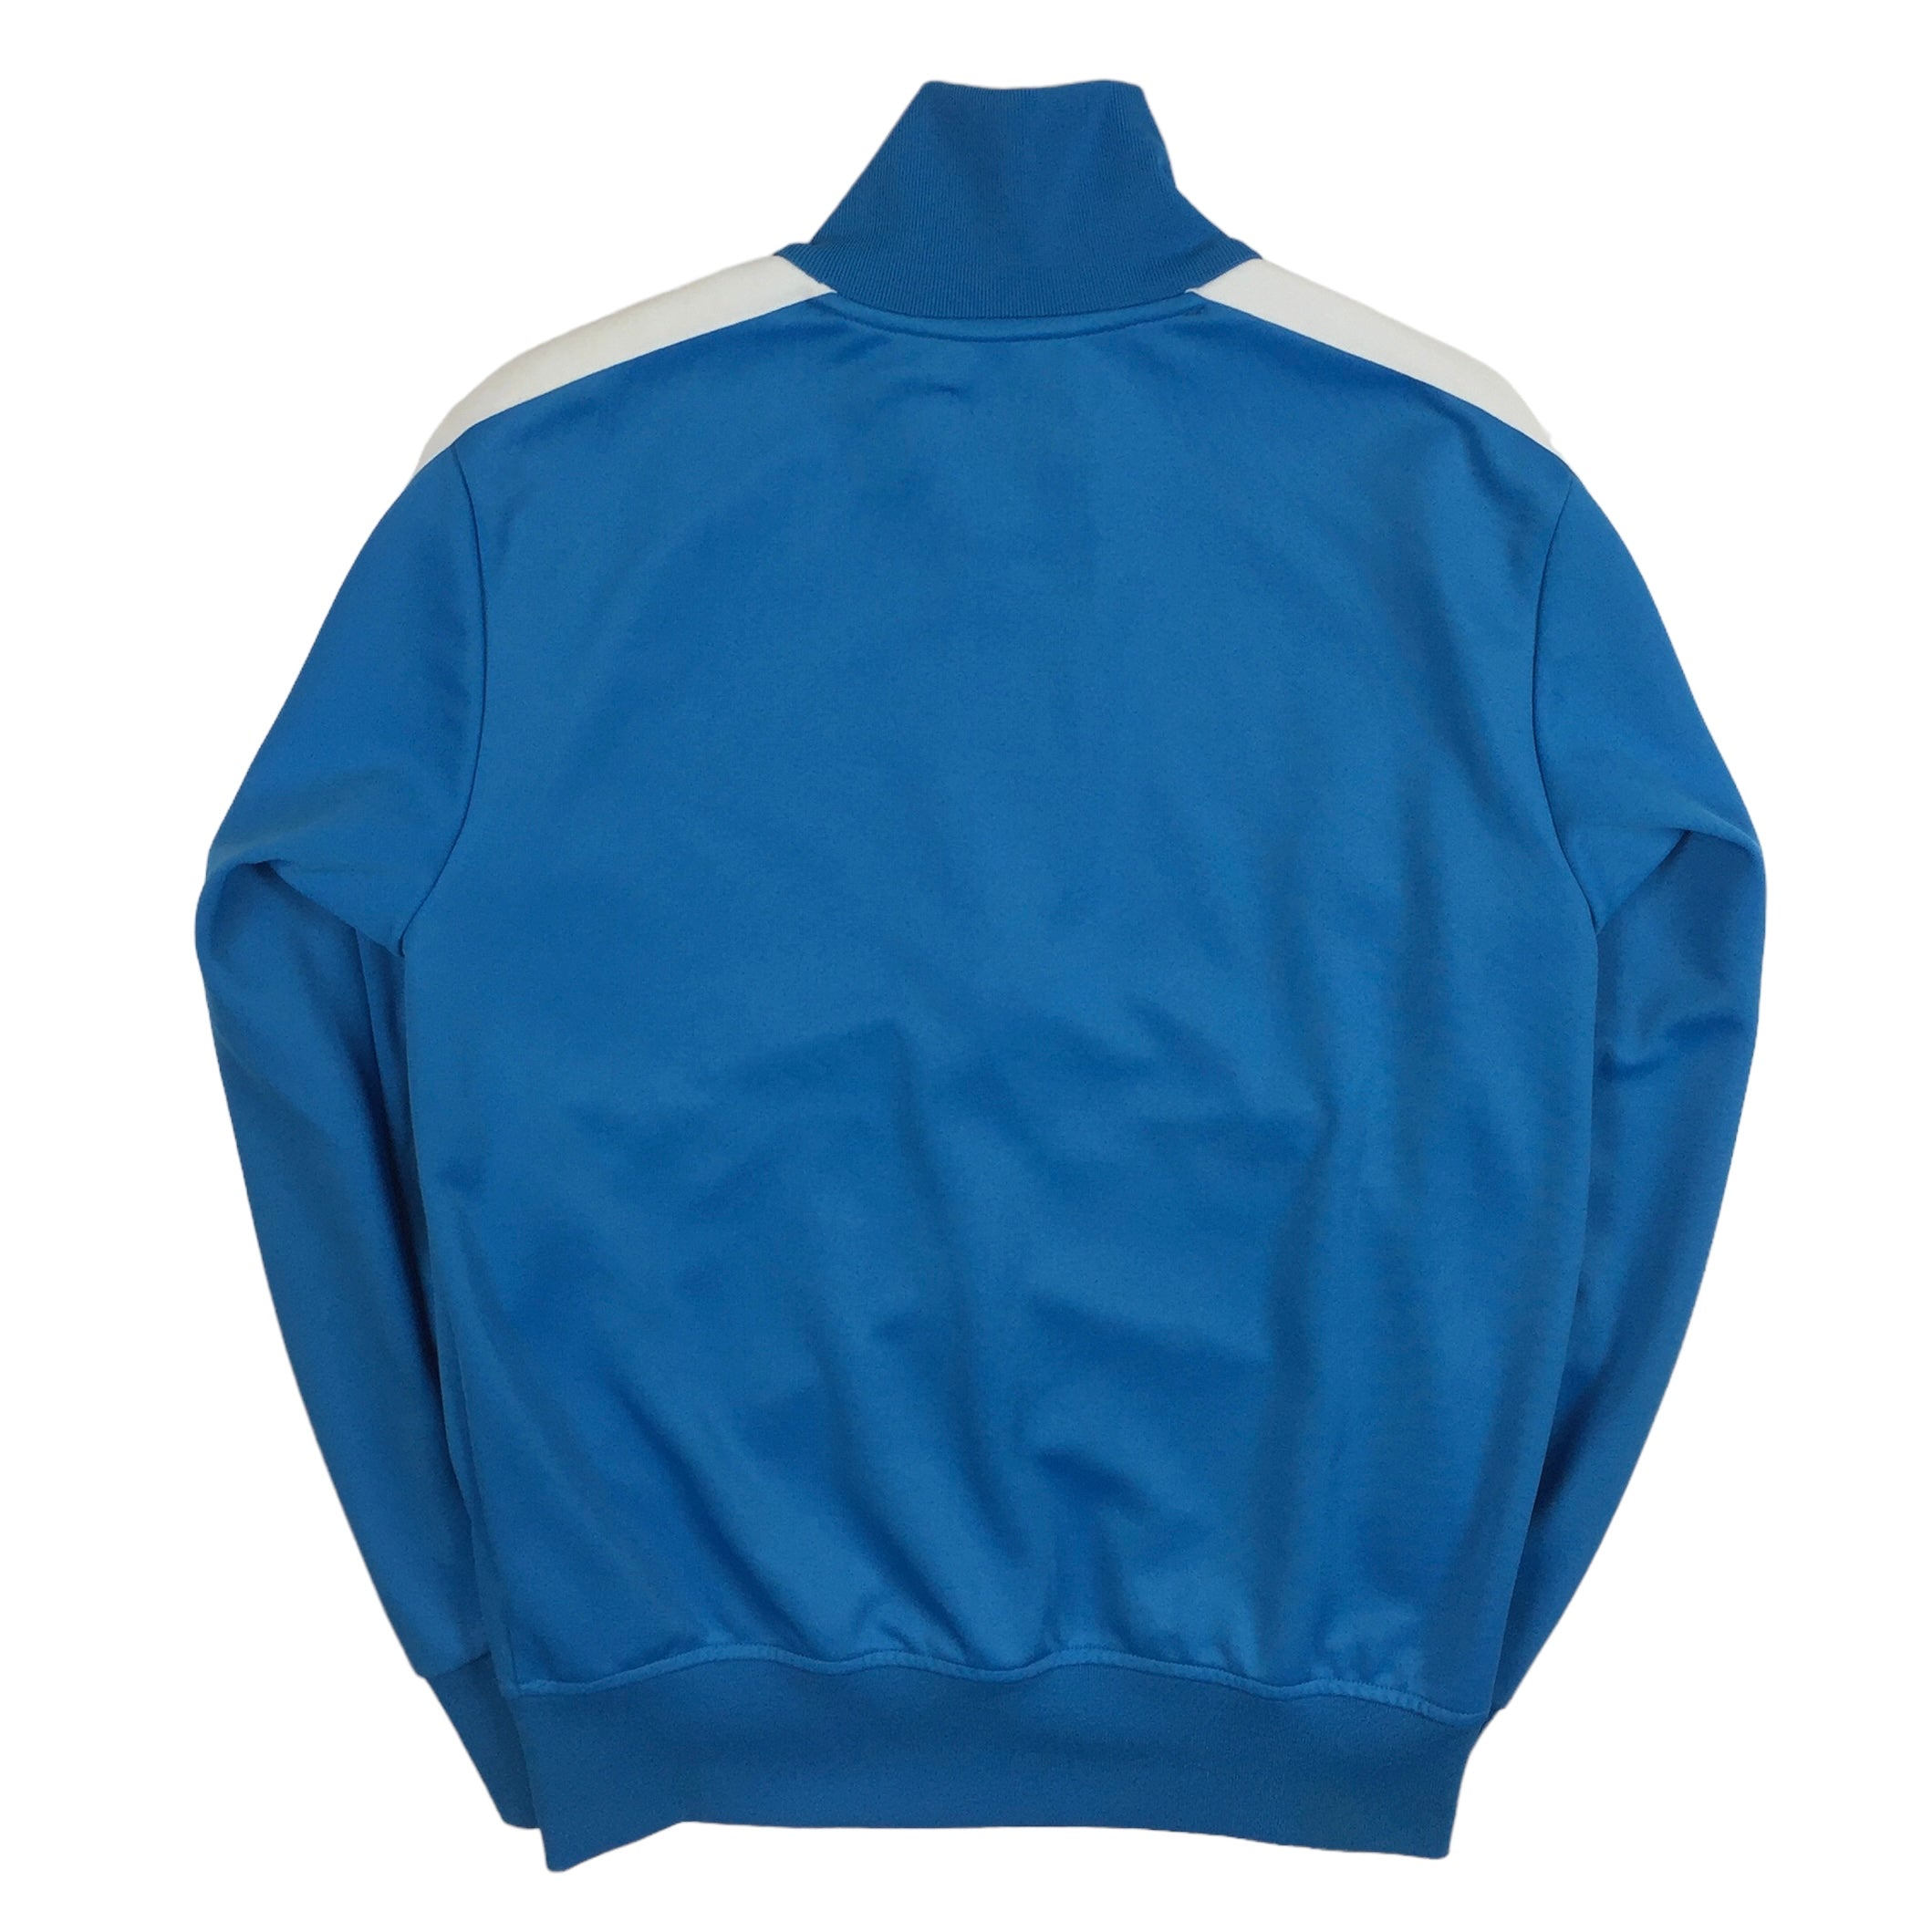 Palm Angels Teal Blue Track Top